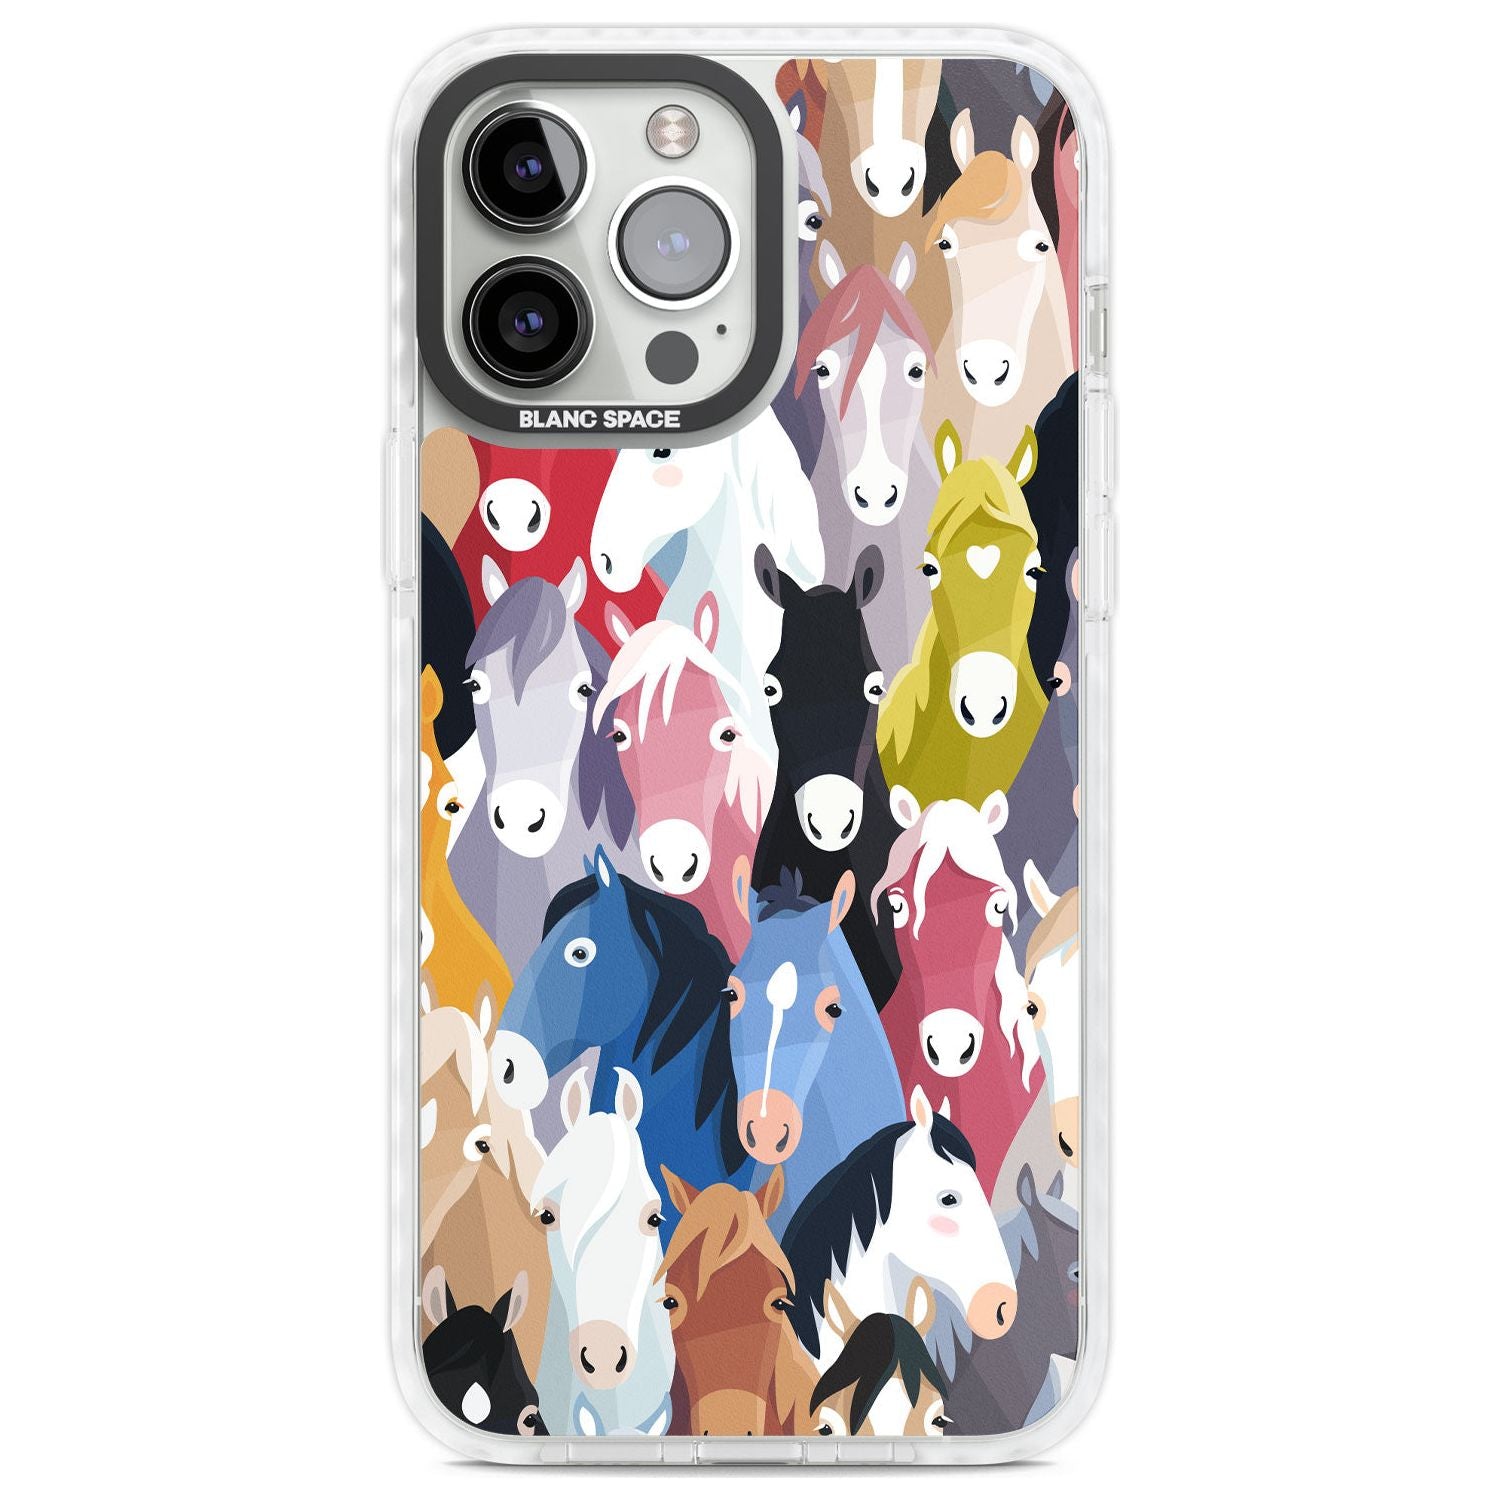 Colourful Horse Pattern Phone Case iPhone 13 Pro Max / Impact Case,iPhone 14 Pro Max / Impact Case Blanc Space